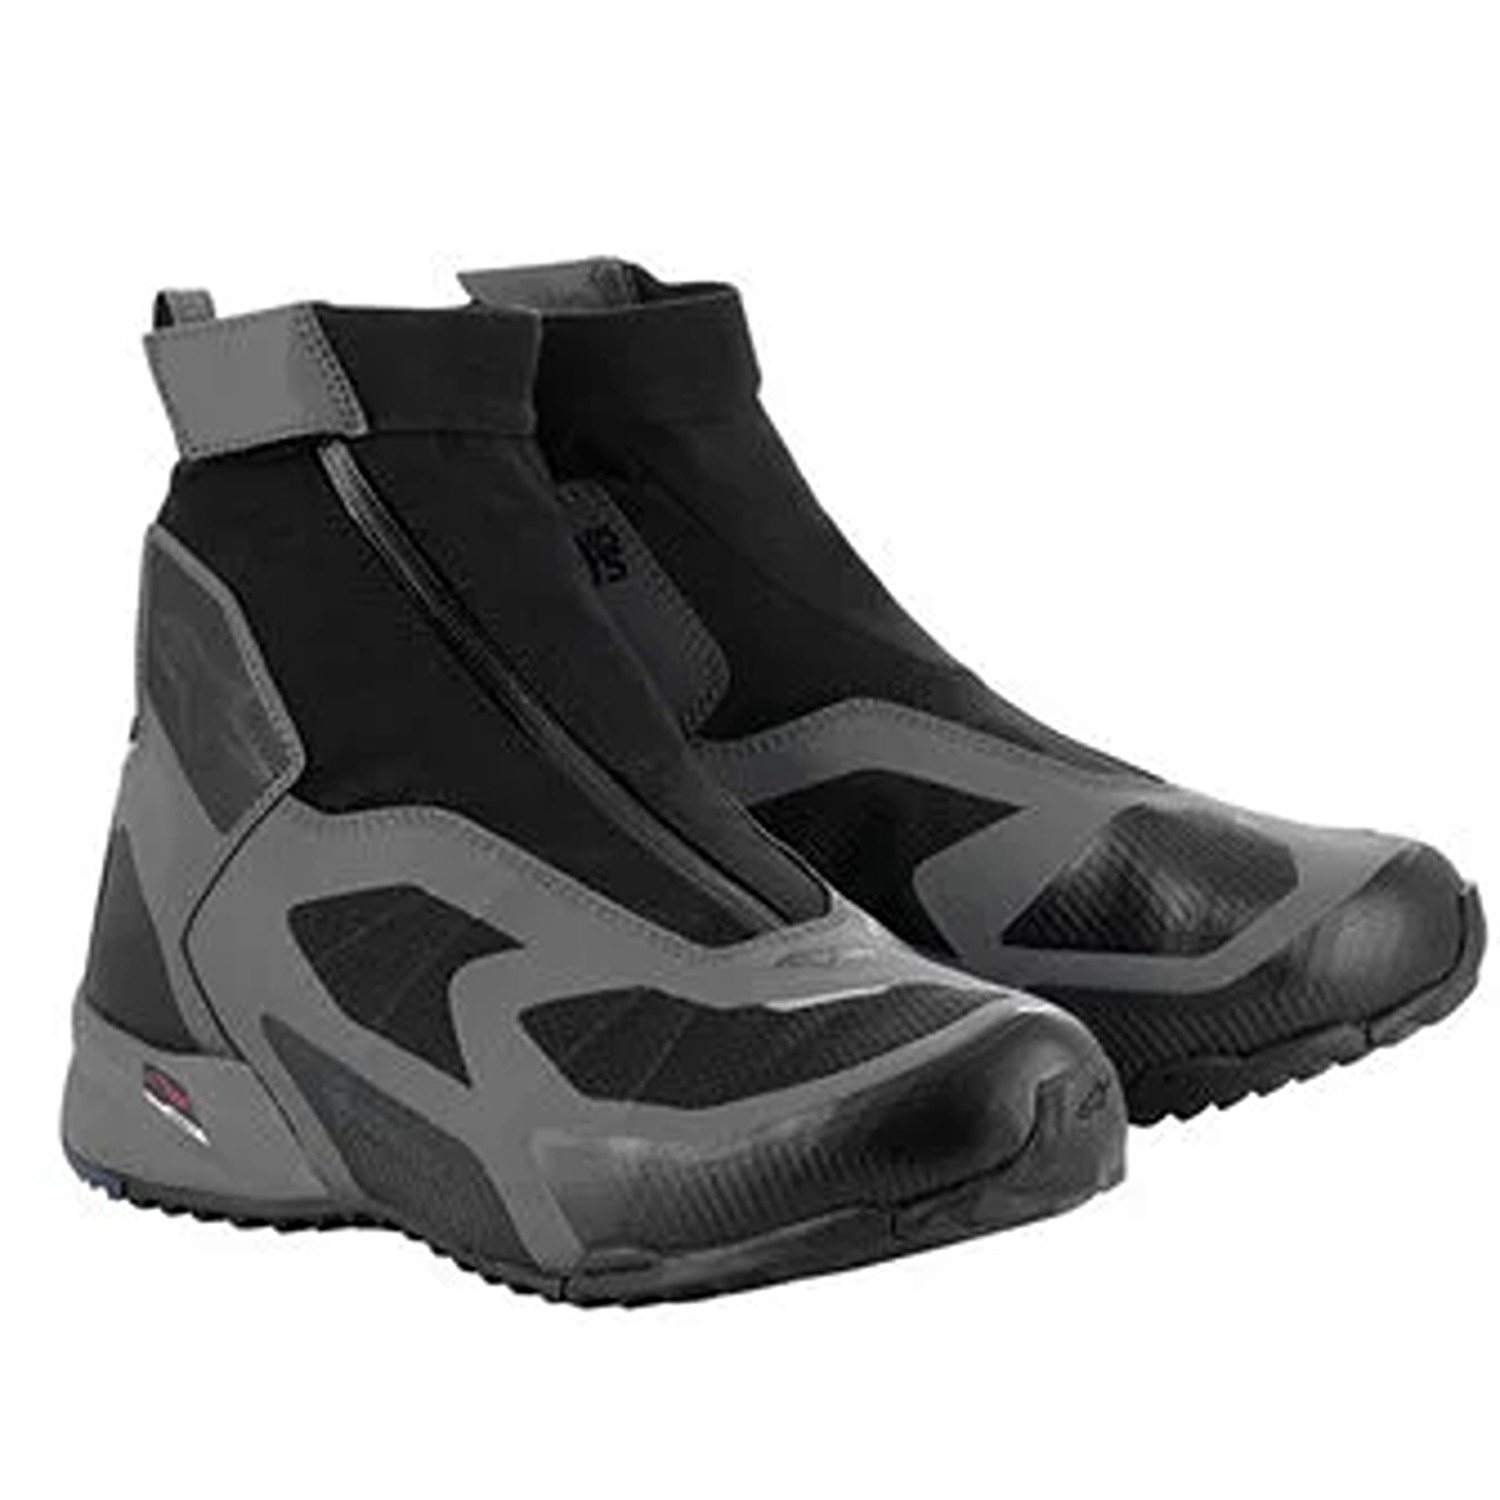 Image of Alpinestars CR-8 Gore-Tex Shoes Black Mid Gray Bright Red Size US 6 EN